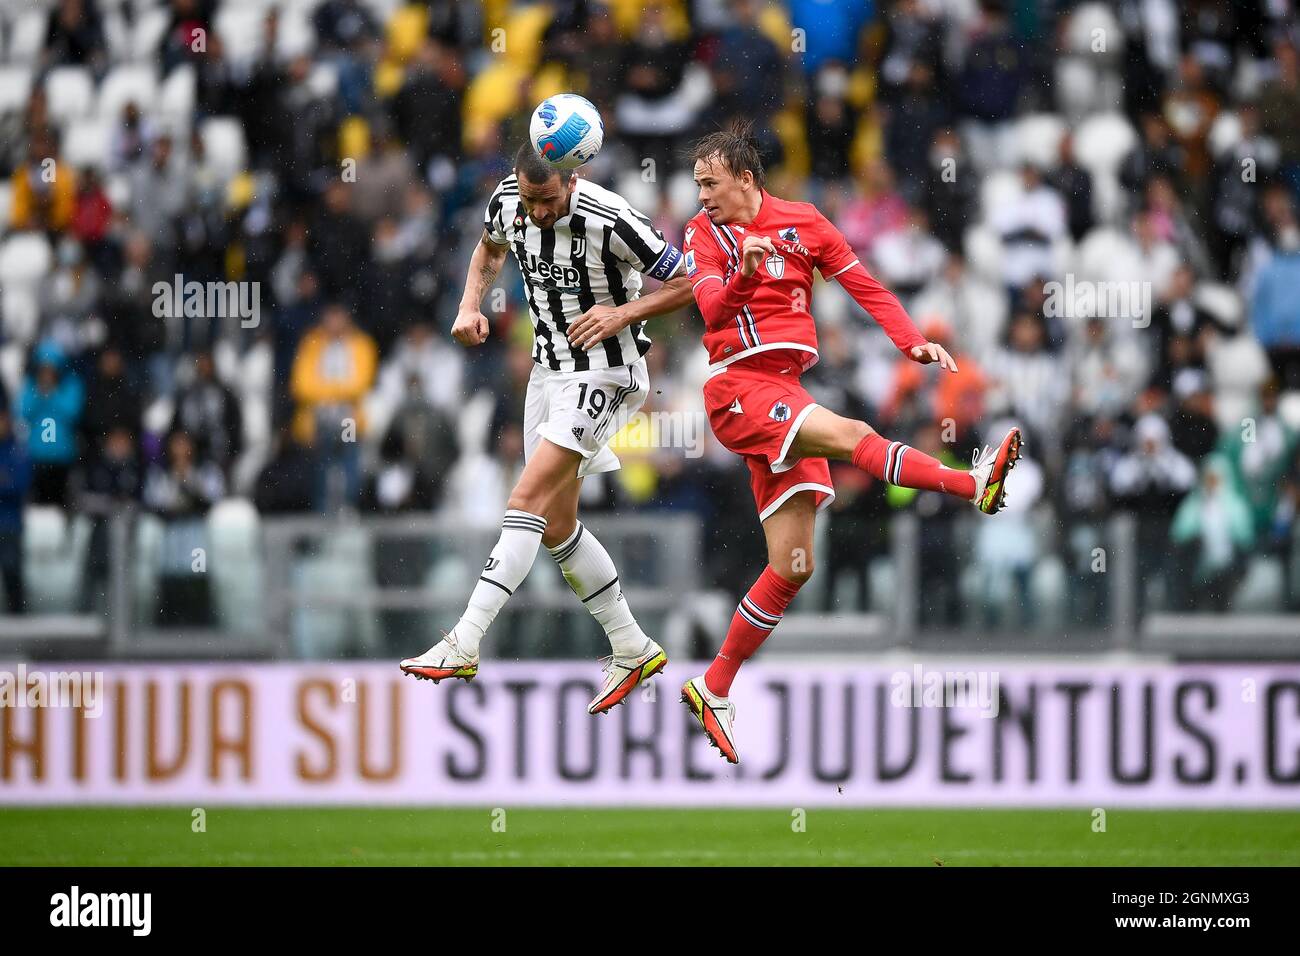 Turin, Italy. 26 September 2021. Leonardo Bonucci (L) of Juventus FC competes for a header with Mikkel Damsgaard of UC Sampdoria during the Serie A football match between Juventus FC and UC Sampdoria. Credit: Nicolò Campo/Alamy Live News Stock Photo